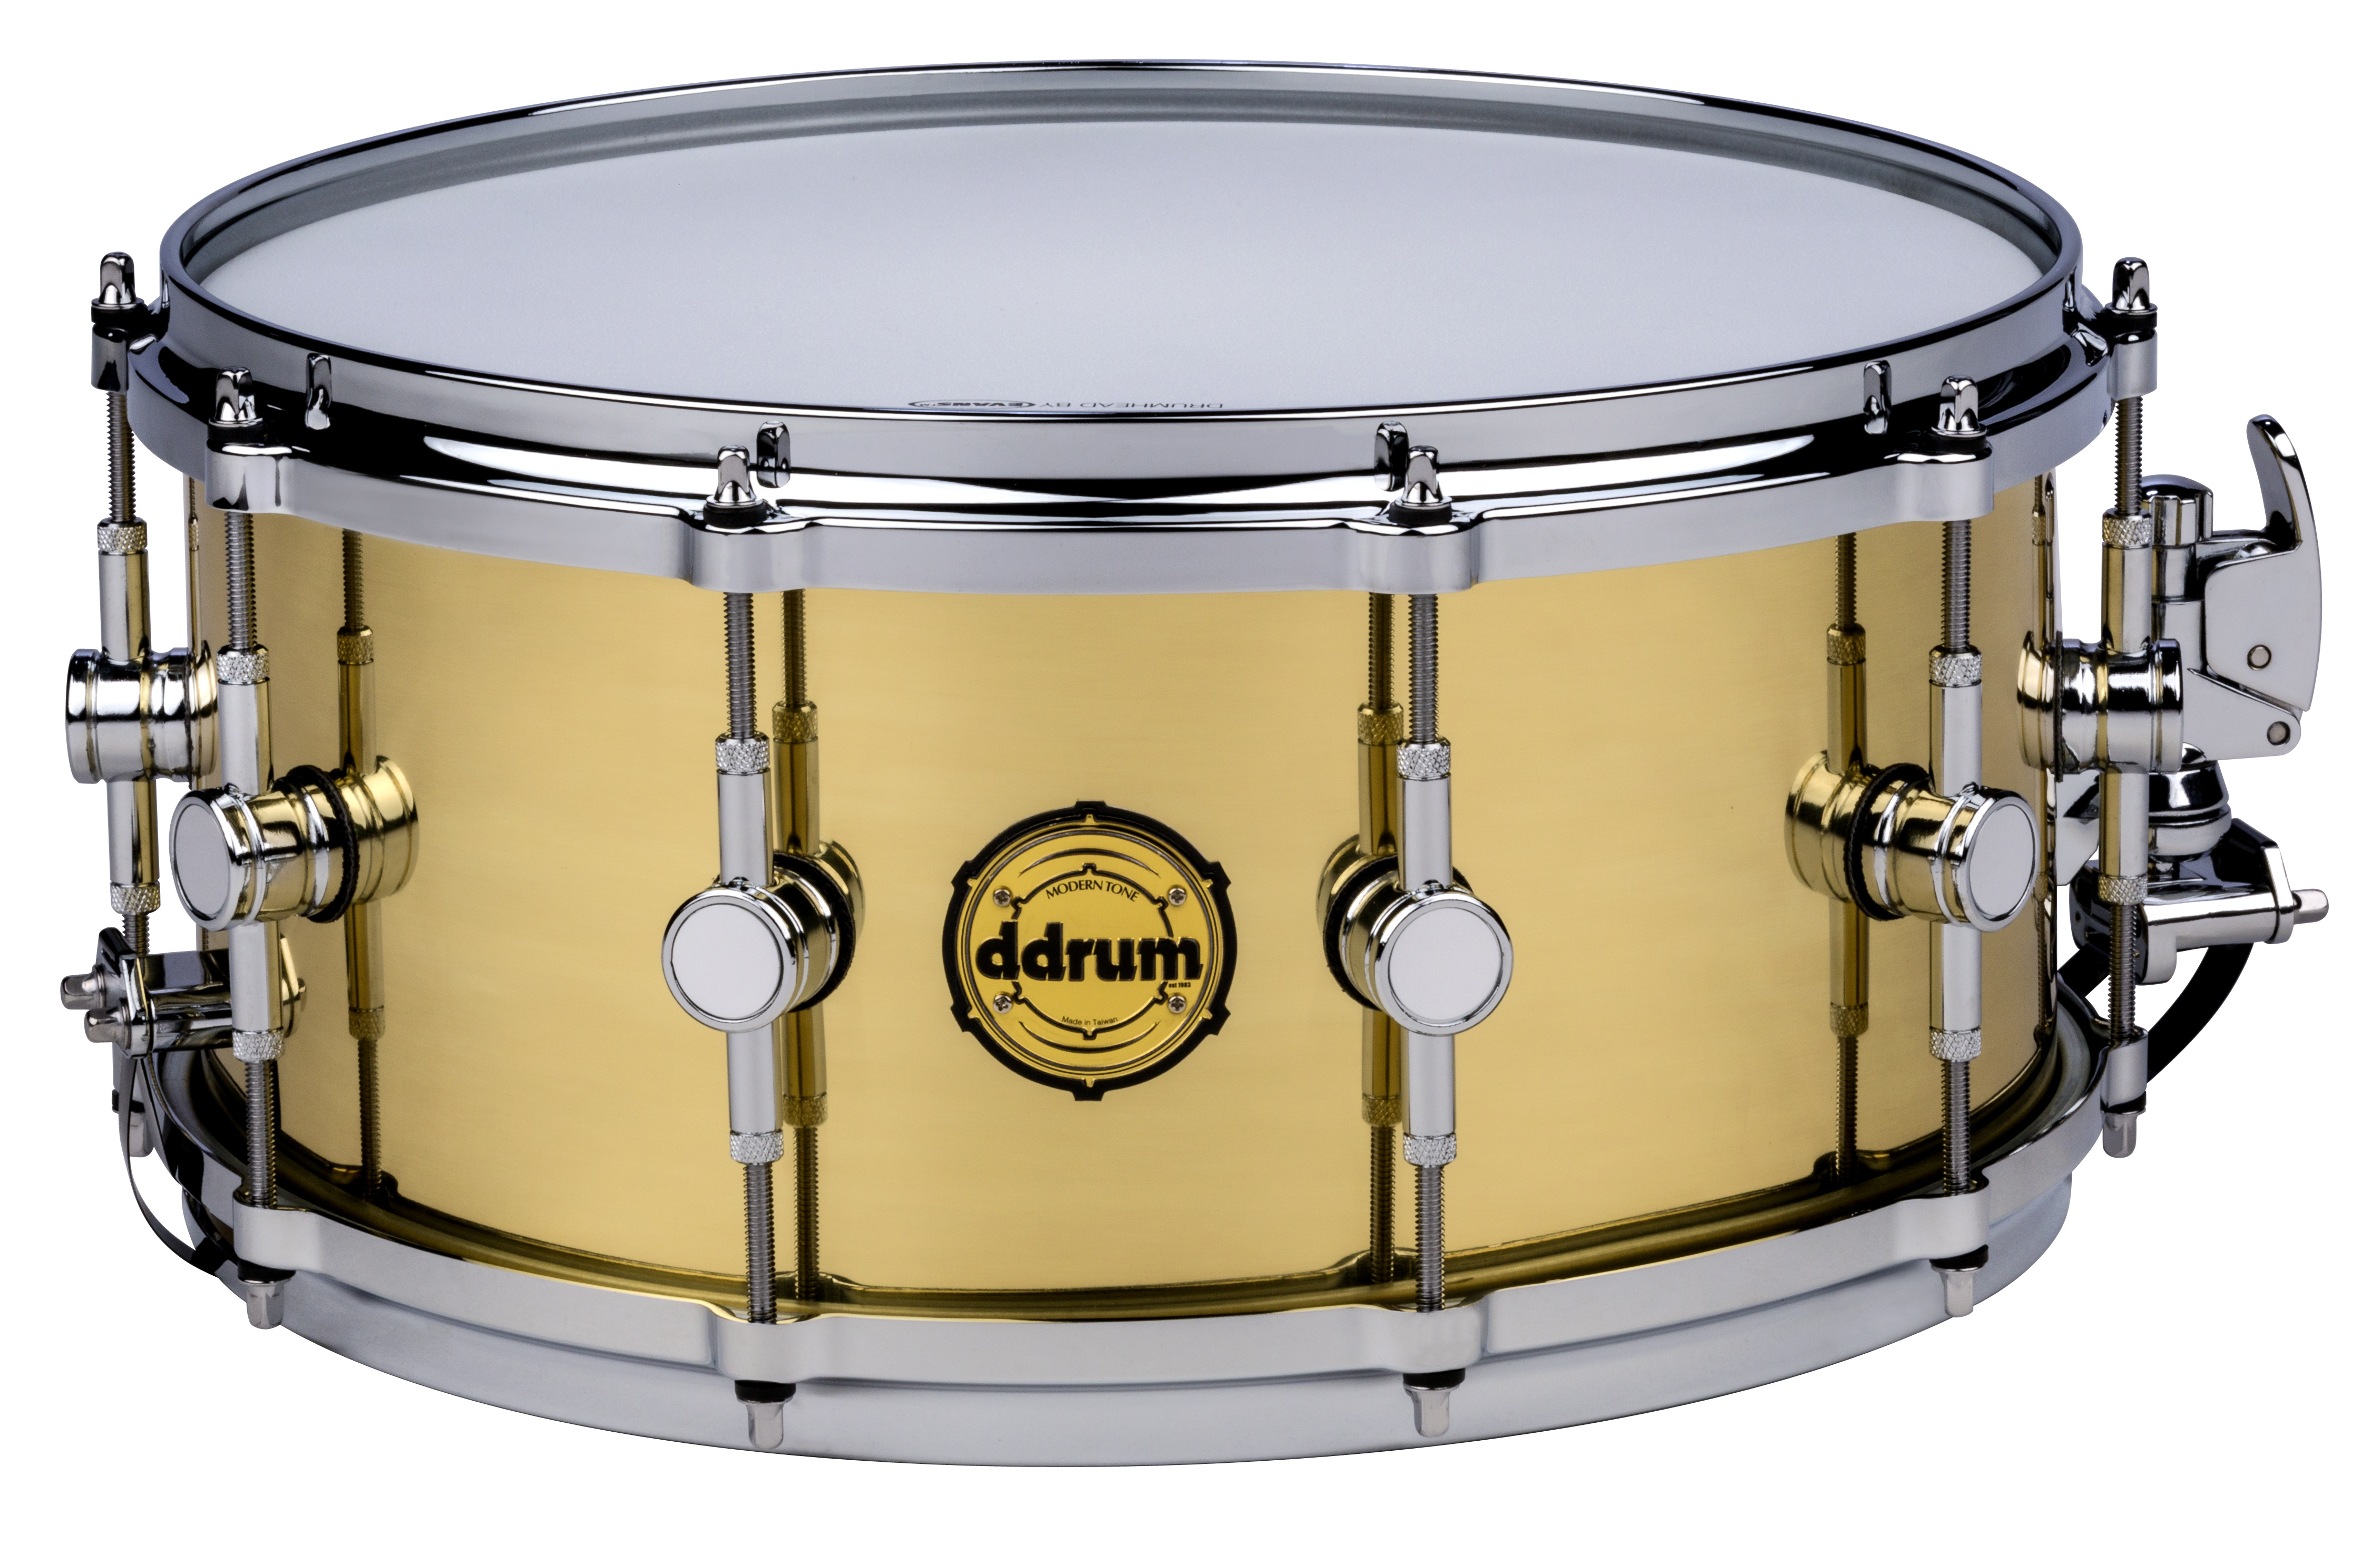 SD　MT　Tone　Drums　6.5X1　6.5x14　Snare　Brass　Snare　ddrum　Modern